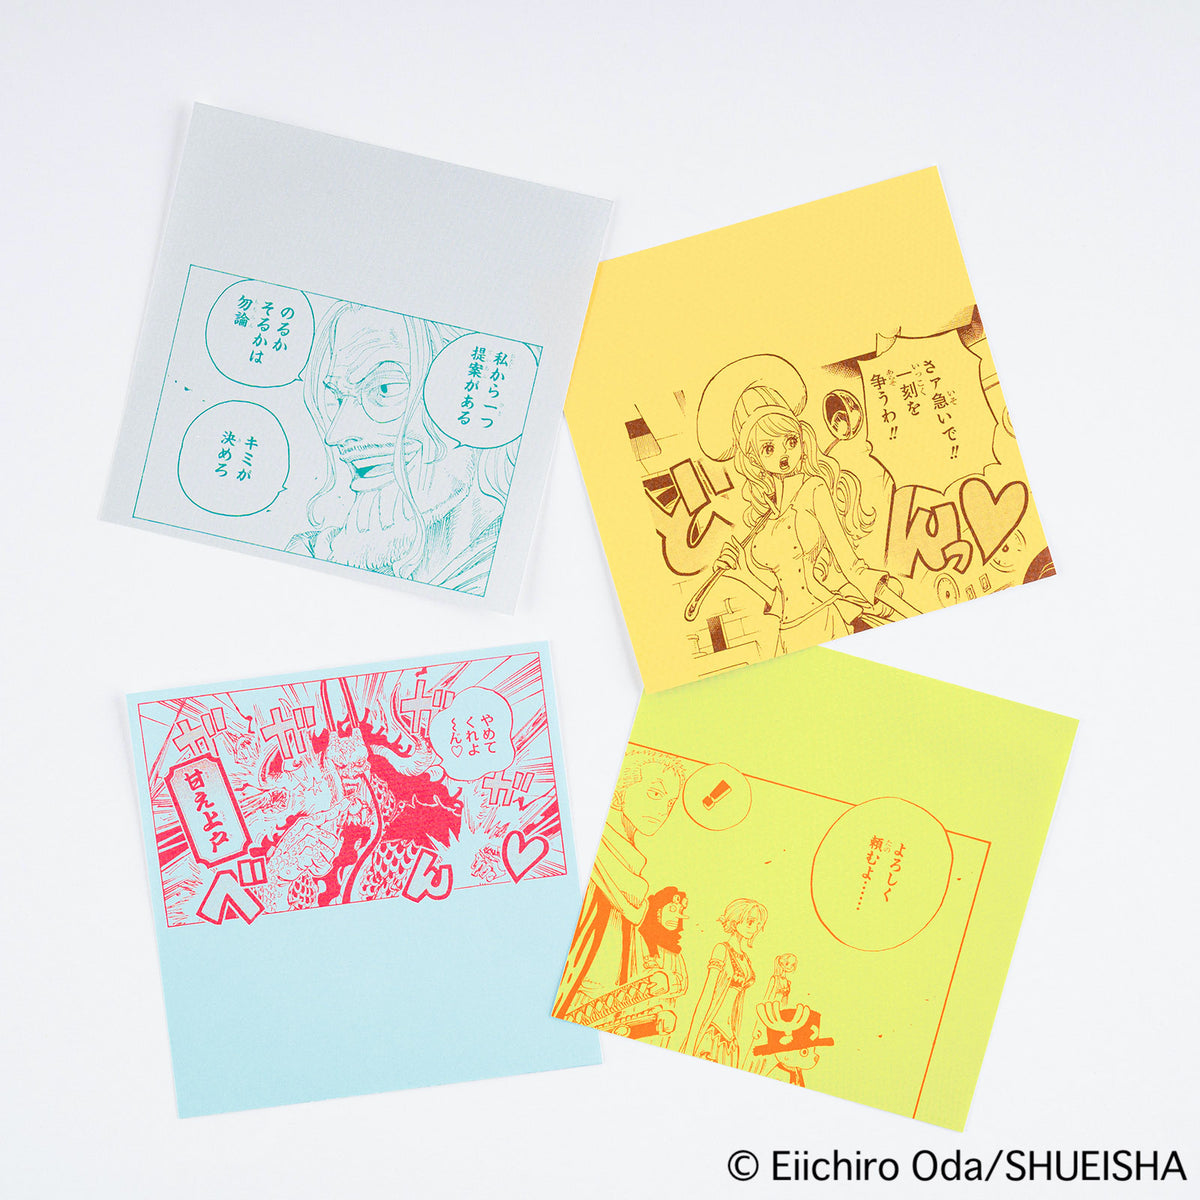 Hobonichi ONE PIECE magazine: Square Letter Paper to Share your Feelings Vol. 2    at Boston General Store